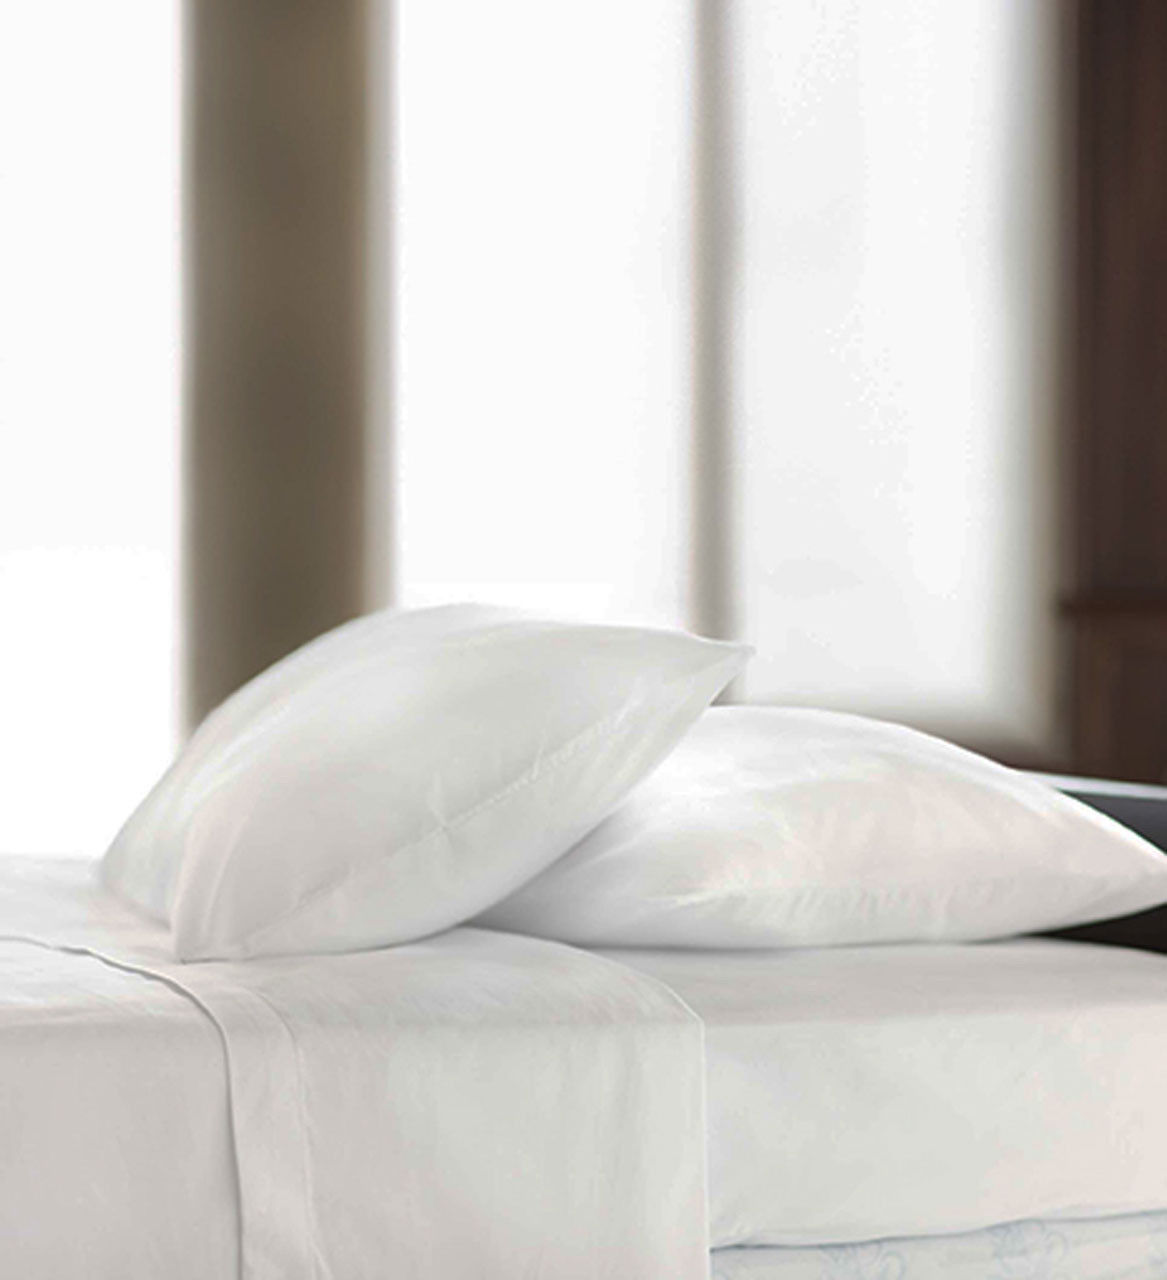 What makes Centium Satin Sheets so durable?